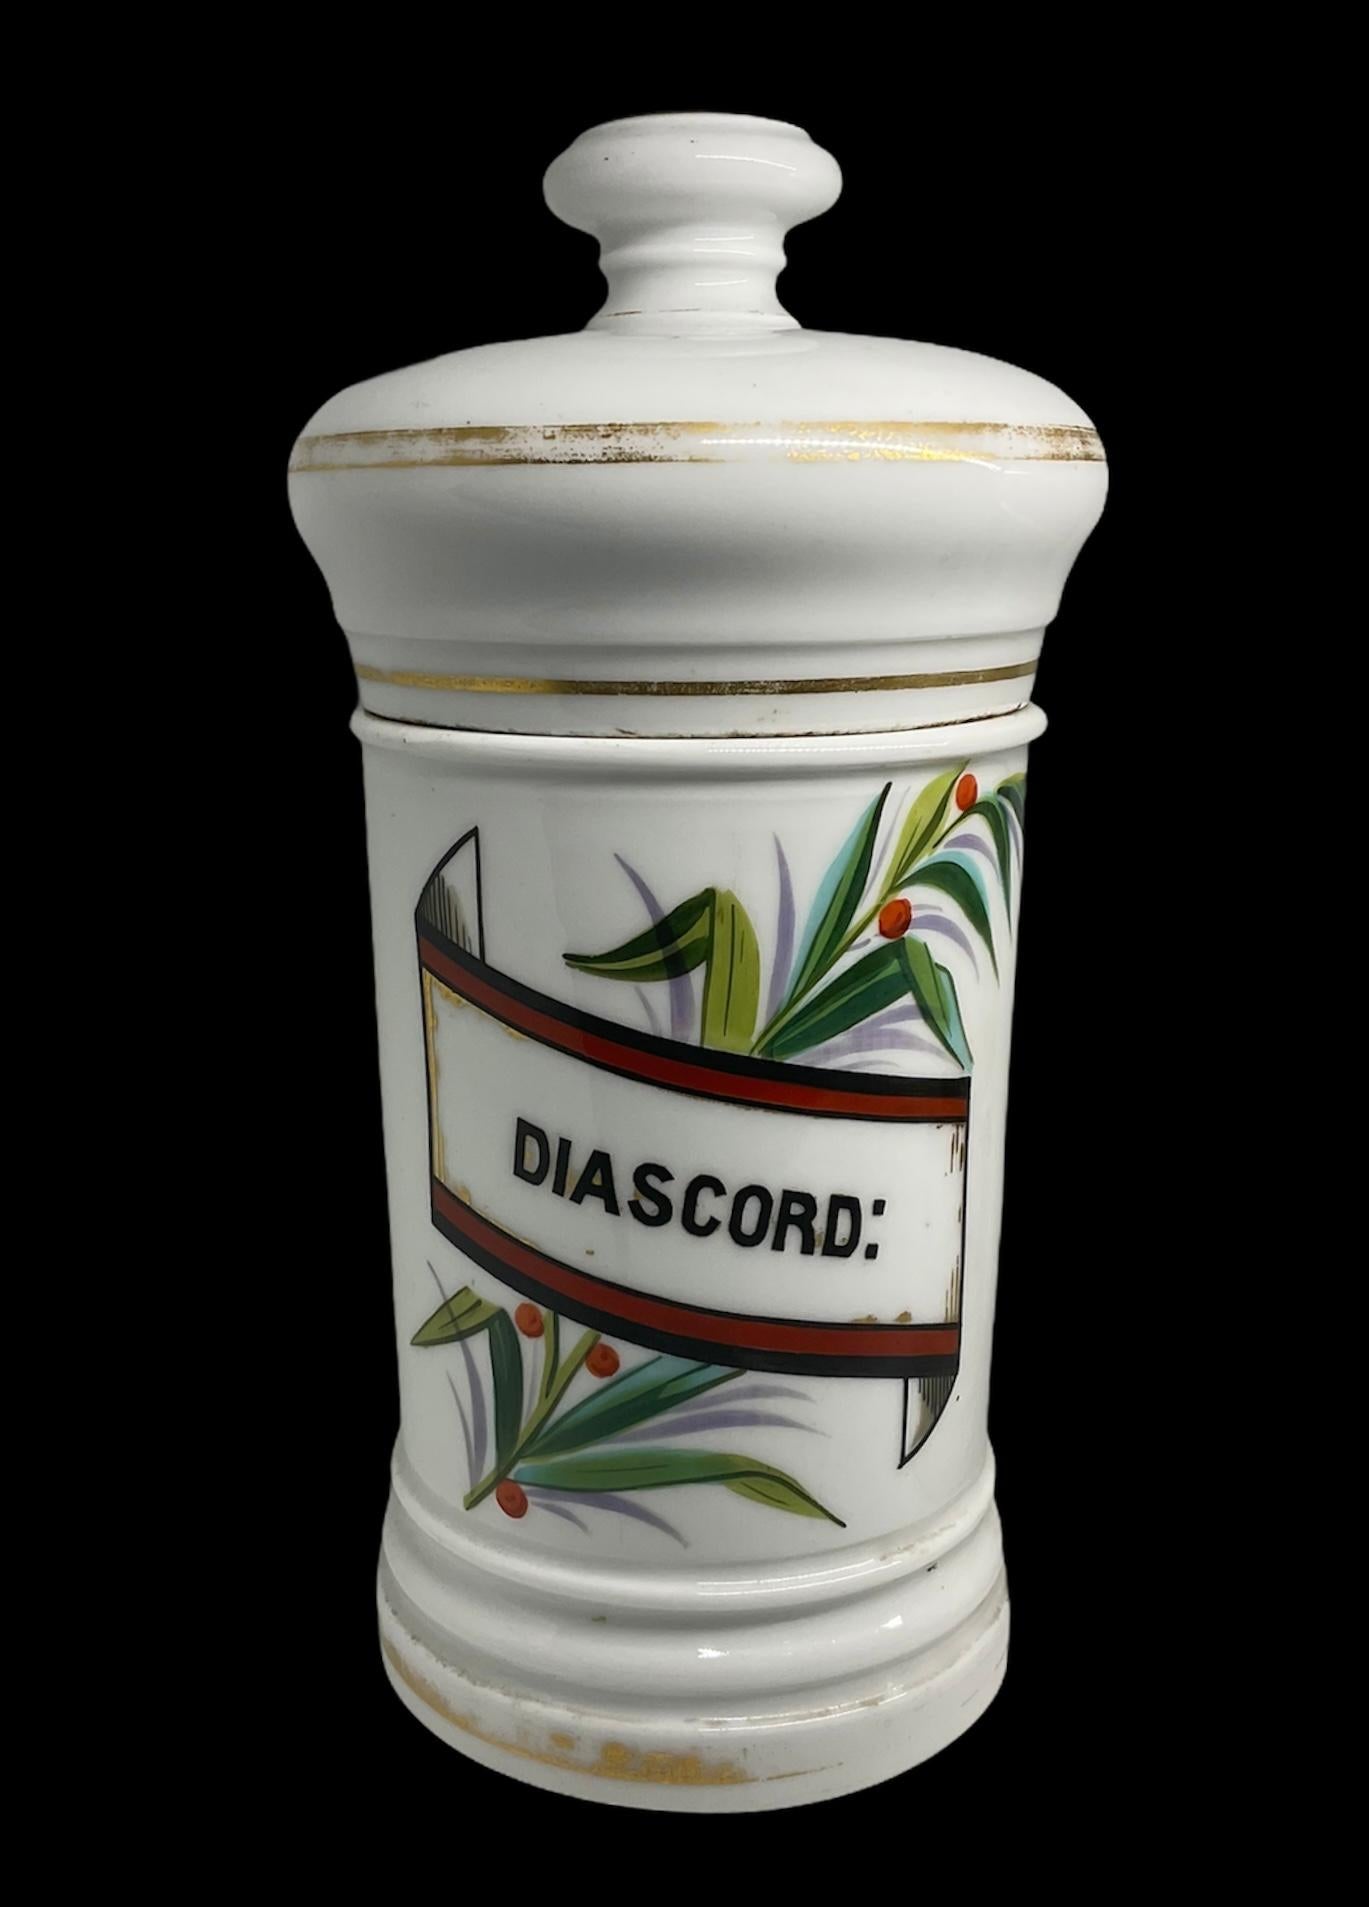 This a pair of wide cylindrical white porcelain apothecary lidded jars. They are hand painted and decorated with some laurel’s branches in the front. The lids are shaped as doctoral tams with a flatted orbit finial. They are also adorned with some